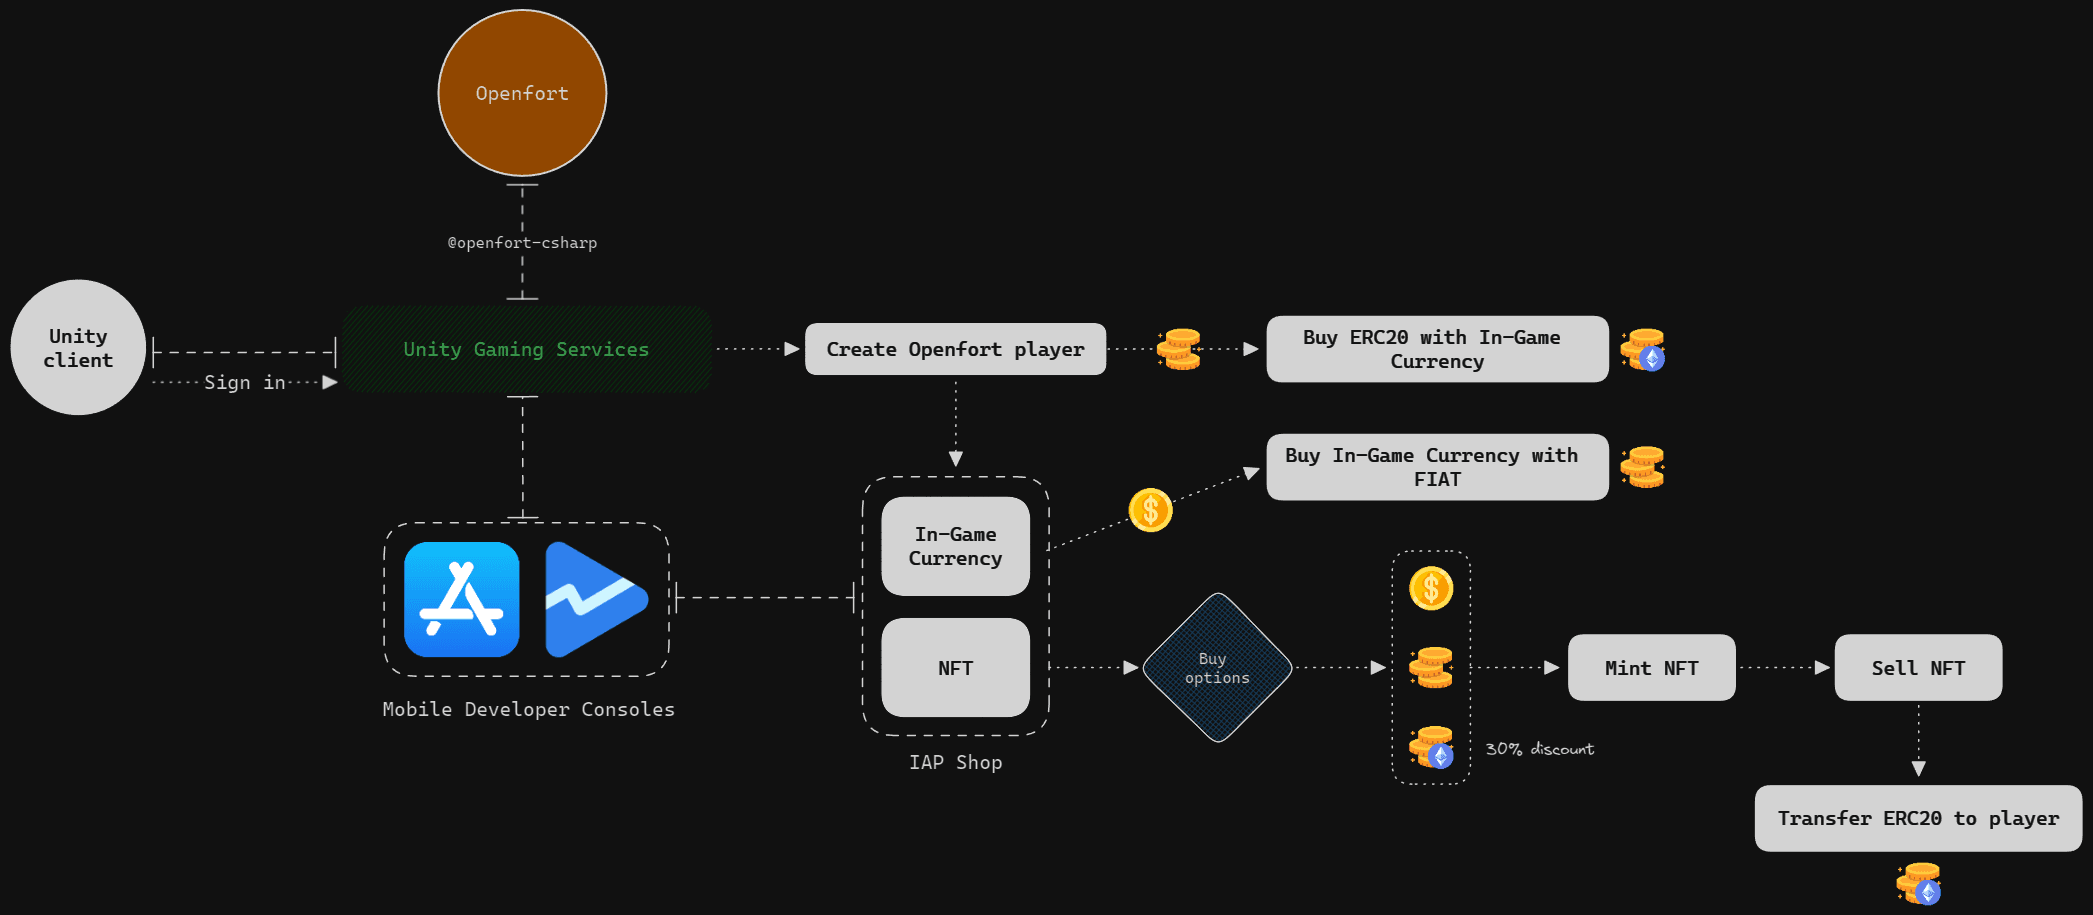 Openfort In-App Purchase Advanced Sample workflow